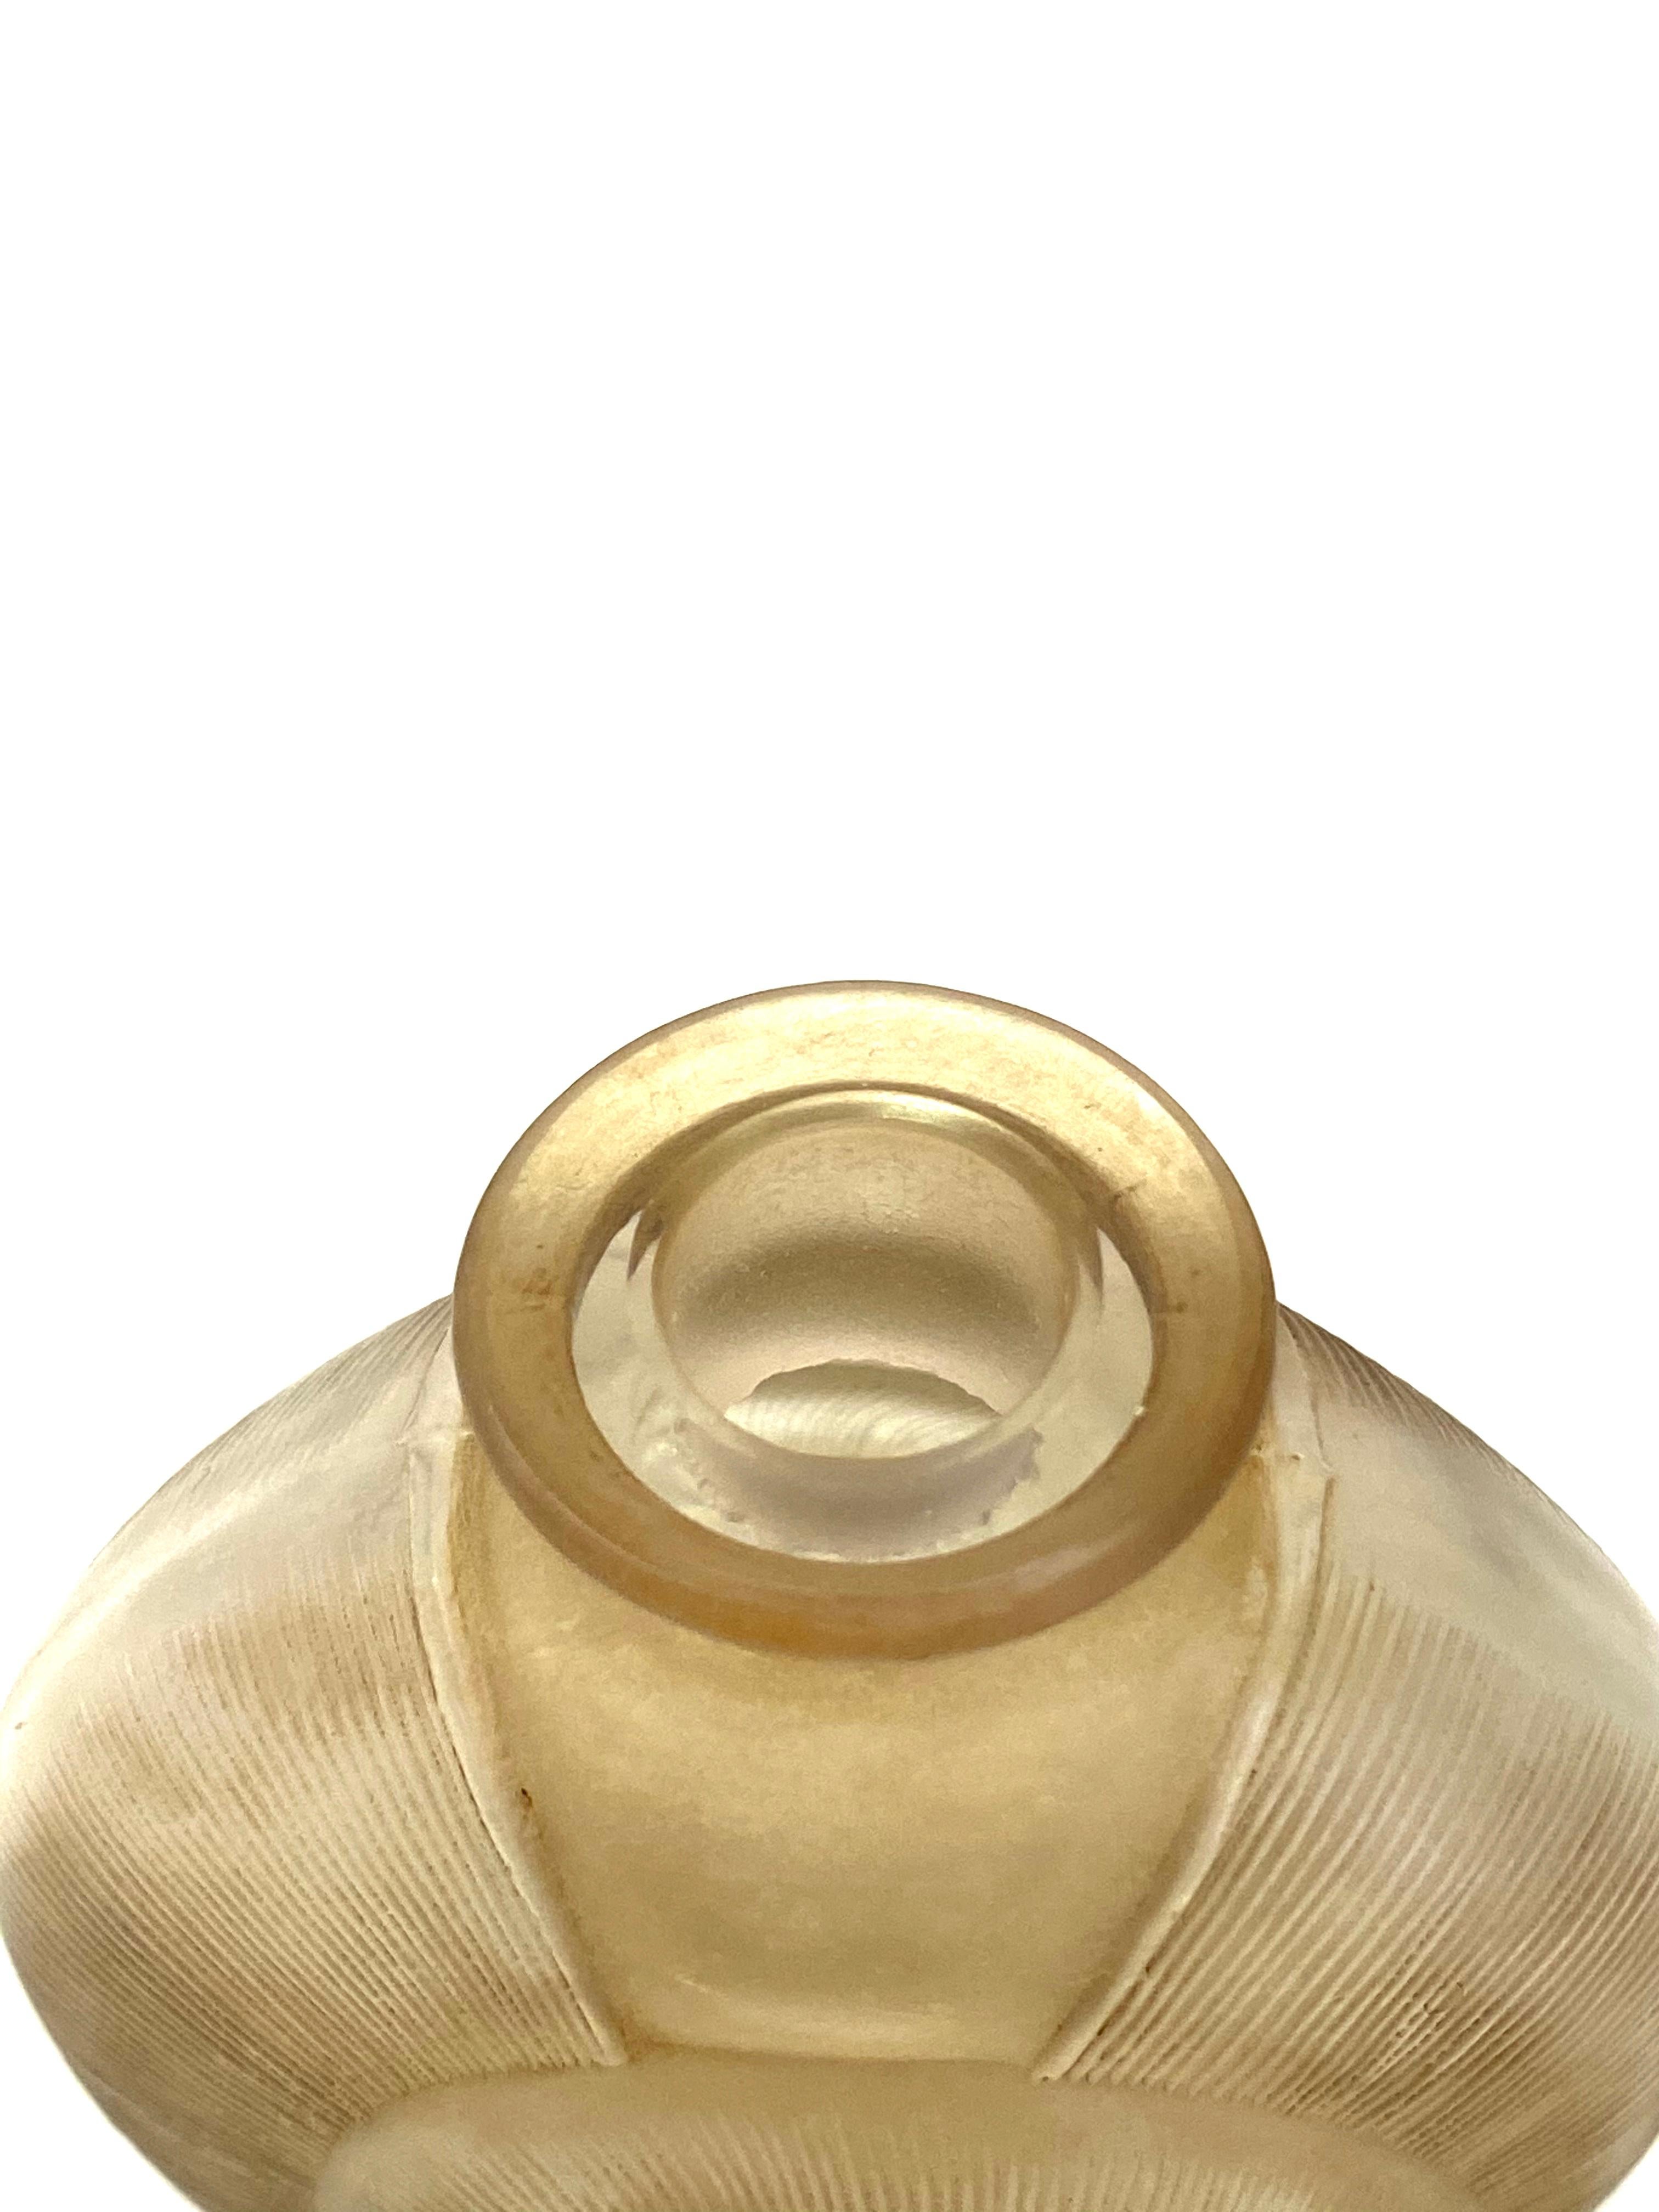 Early 20th Century 1920 René Lalique Amphitrite Perfume Bottle Frosted Glass with Sepia Patina